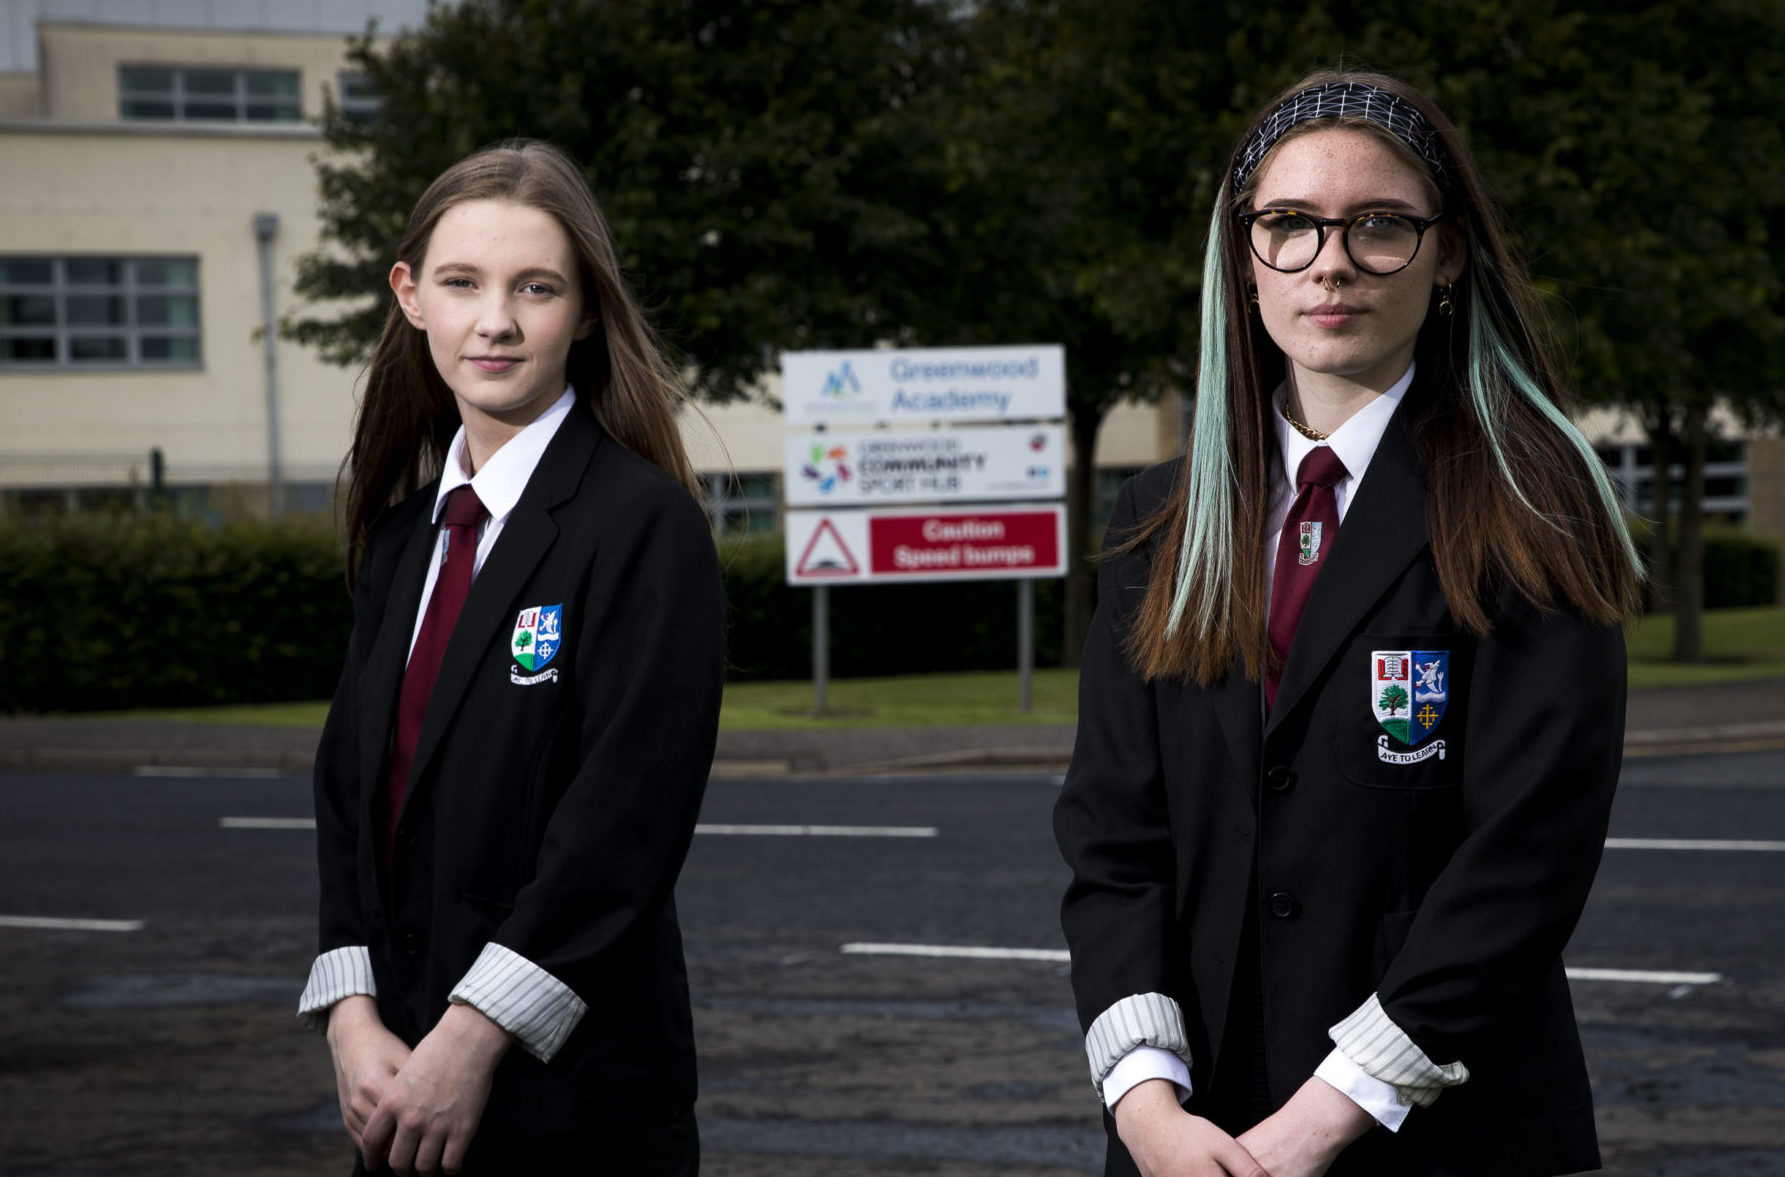 Nicole Tait and Ellie Little, who attend Greenwood Academy in Dreghorn North Ayrshire